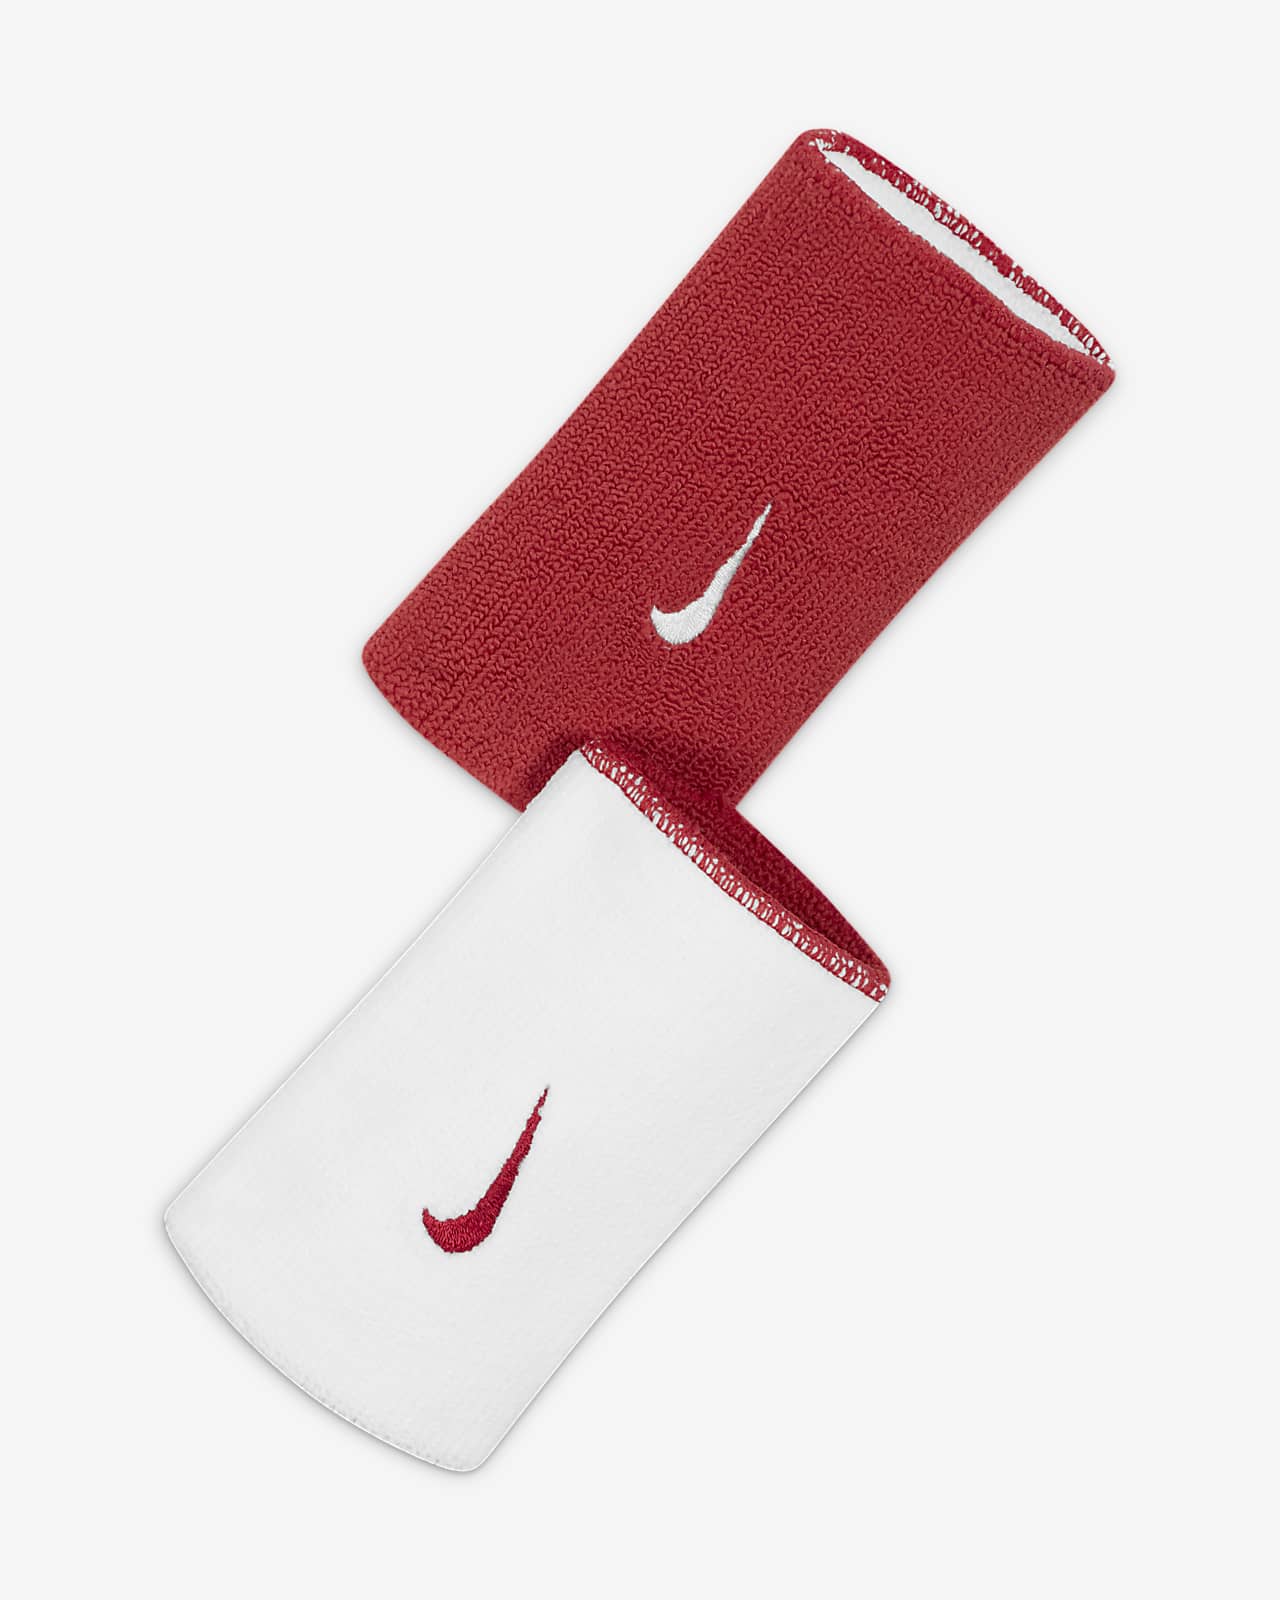 Nike Dri-FIT Double-Wide Reversible Wristbands (2-Pack)